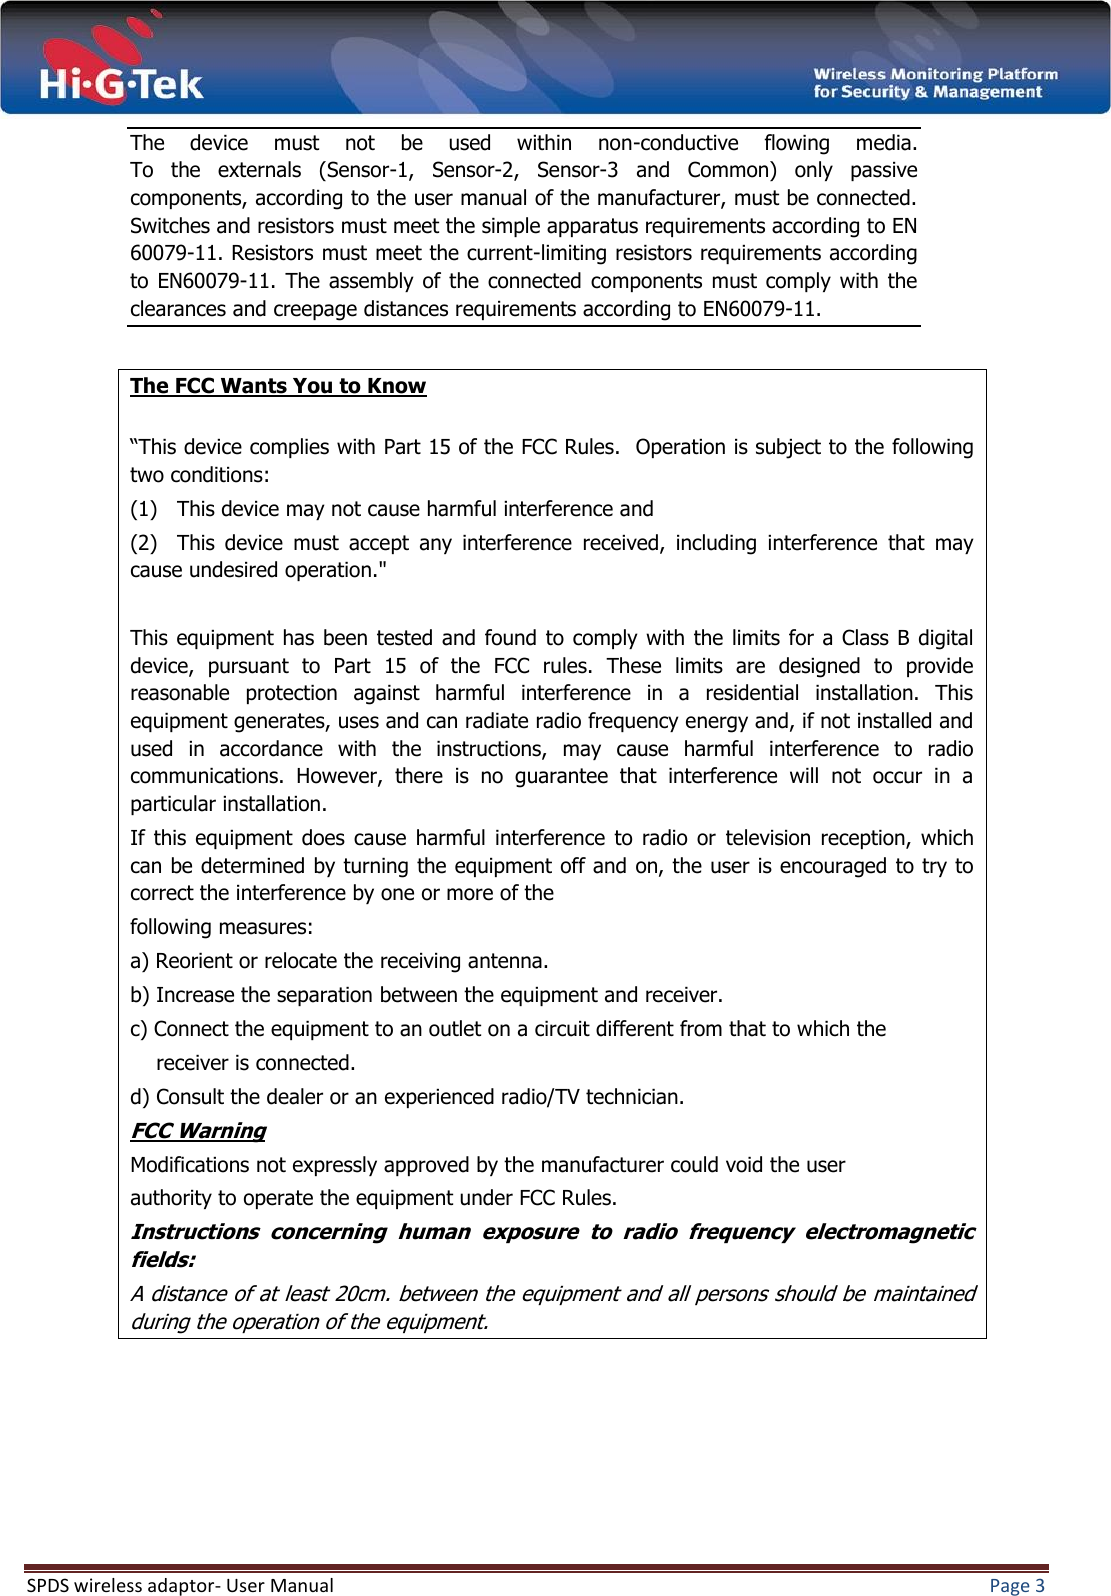  SPDS wireless adaptor- User Manual  Page 3  The  device  must  not  be  used  within  non-conductive  flowing  media. To  the  externals  (Sensor-1,  Sensor-2,  Sensor-3  and  Common)  only  passive components, according to the user manual of the manufacturer, must be connected. Switches and resistors must meet the simple apparatus requirements according to EN 60079-11. Resistors must meet the current-limiting resistors requirements according to EN60079-11.  The  assembly  of the  connected  components  must  comply  with  the clearances and creepage distances requirements according to EN60079-11.  The FCC Wants You to Know  “This device complies with Part 15 of the FCC Rules.  Operation is subject to the following two conditions: (1)   This device may not cause harmful interference and (2)   This  device  must  accept  any  interference  received,  including  interference  that  may cause undesired operation.&quot;  This equipment  has  been tested  and found to comply  with the limits  for  a Class B digital device,  pursuant  to  Part  15  of  the  FCC  rules.  These  limits  are  designed  to  provide reasonable  protection  against  harmful  interference  in  a  residential  installation.  This equipment generates, uses and can radiate radio frequency energy and, if not installed and used  in  accordance  with  the  instructions,  may  cause  harmful  interference  to  radio communications.  However,  there  is  no  guarantee  that  interference  will  not  occur  in  a particular installation.  If  this  equipment  does  cause  harmful  interference  to  radio  or  television  reception,  which can be determined by turning the equipment off and on, the user is encouraged to try to correct the interference by one or more of the following measures: a) Reorient or relocate the receiving antenna. b) Increase the separation between the equipment and receiver. c) Connect the equipment to an outlet on a circuit different from that to which the     receiver is connected. d) Consult the dealer or an experienced radio/TV technician. FCC Warning Modifications not expressly approved by the manufacturer could void the user authority to operate the equipment under FCC Rules. Instructions  concerning  human  exposure  to  radio  frequency  electromagnetic fields: A distance of at least 20cm. between the equipment and all persons should be maintained during the operation of the equipment.    